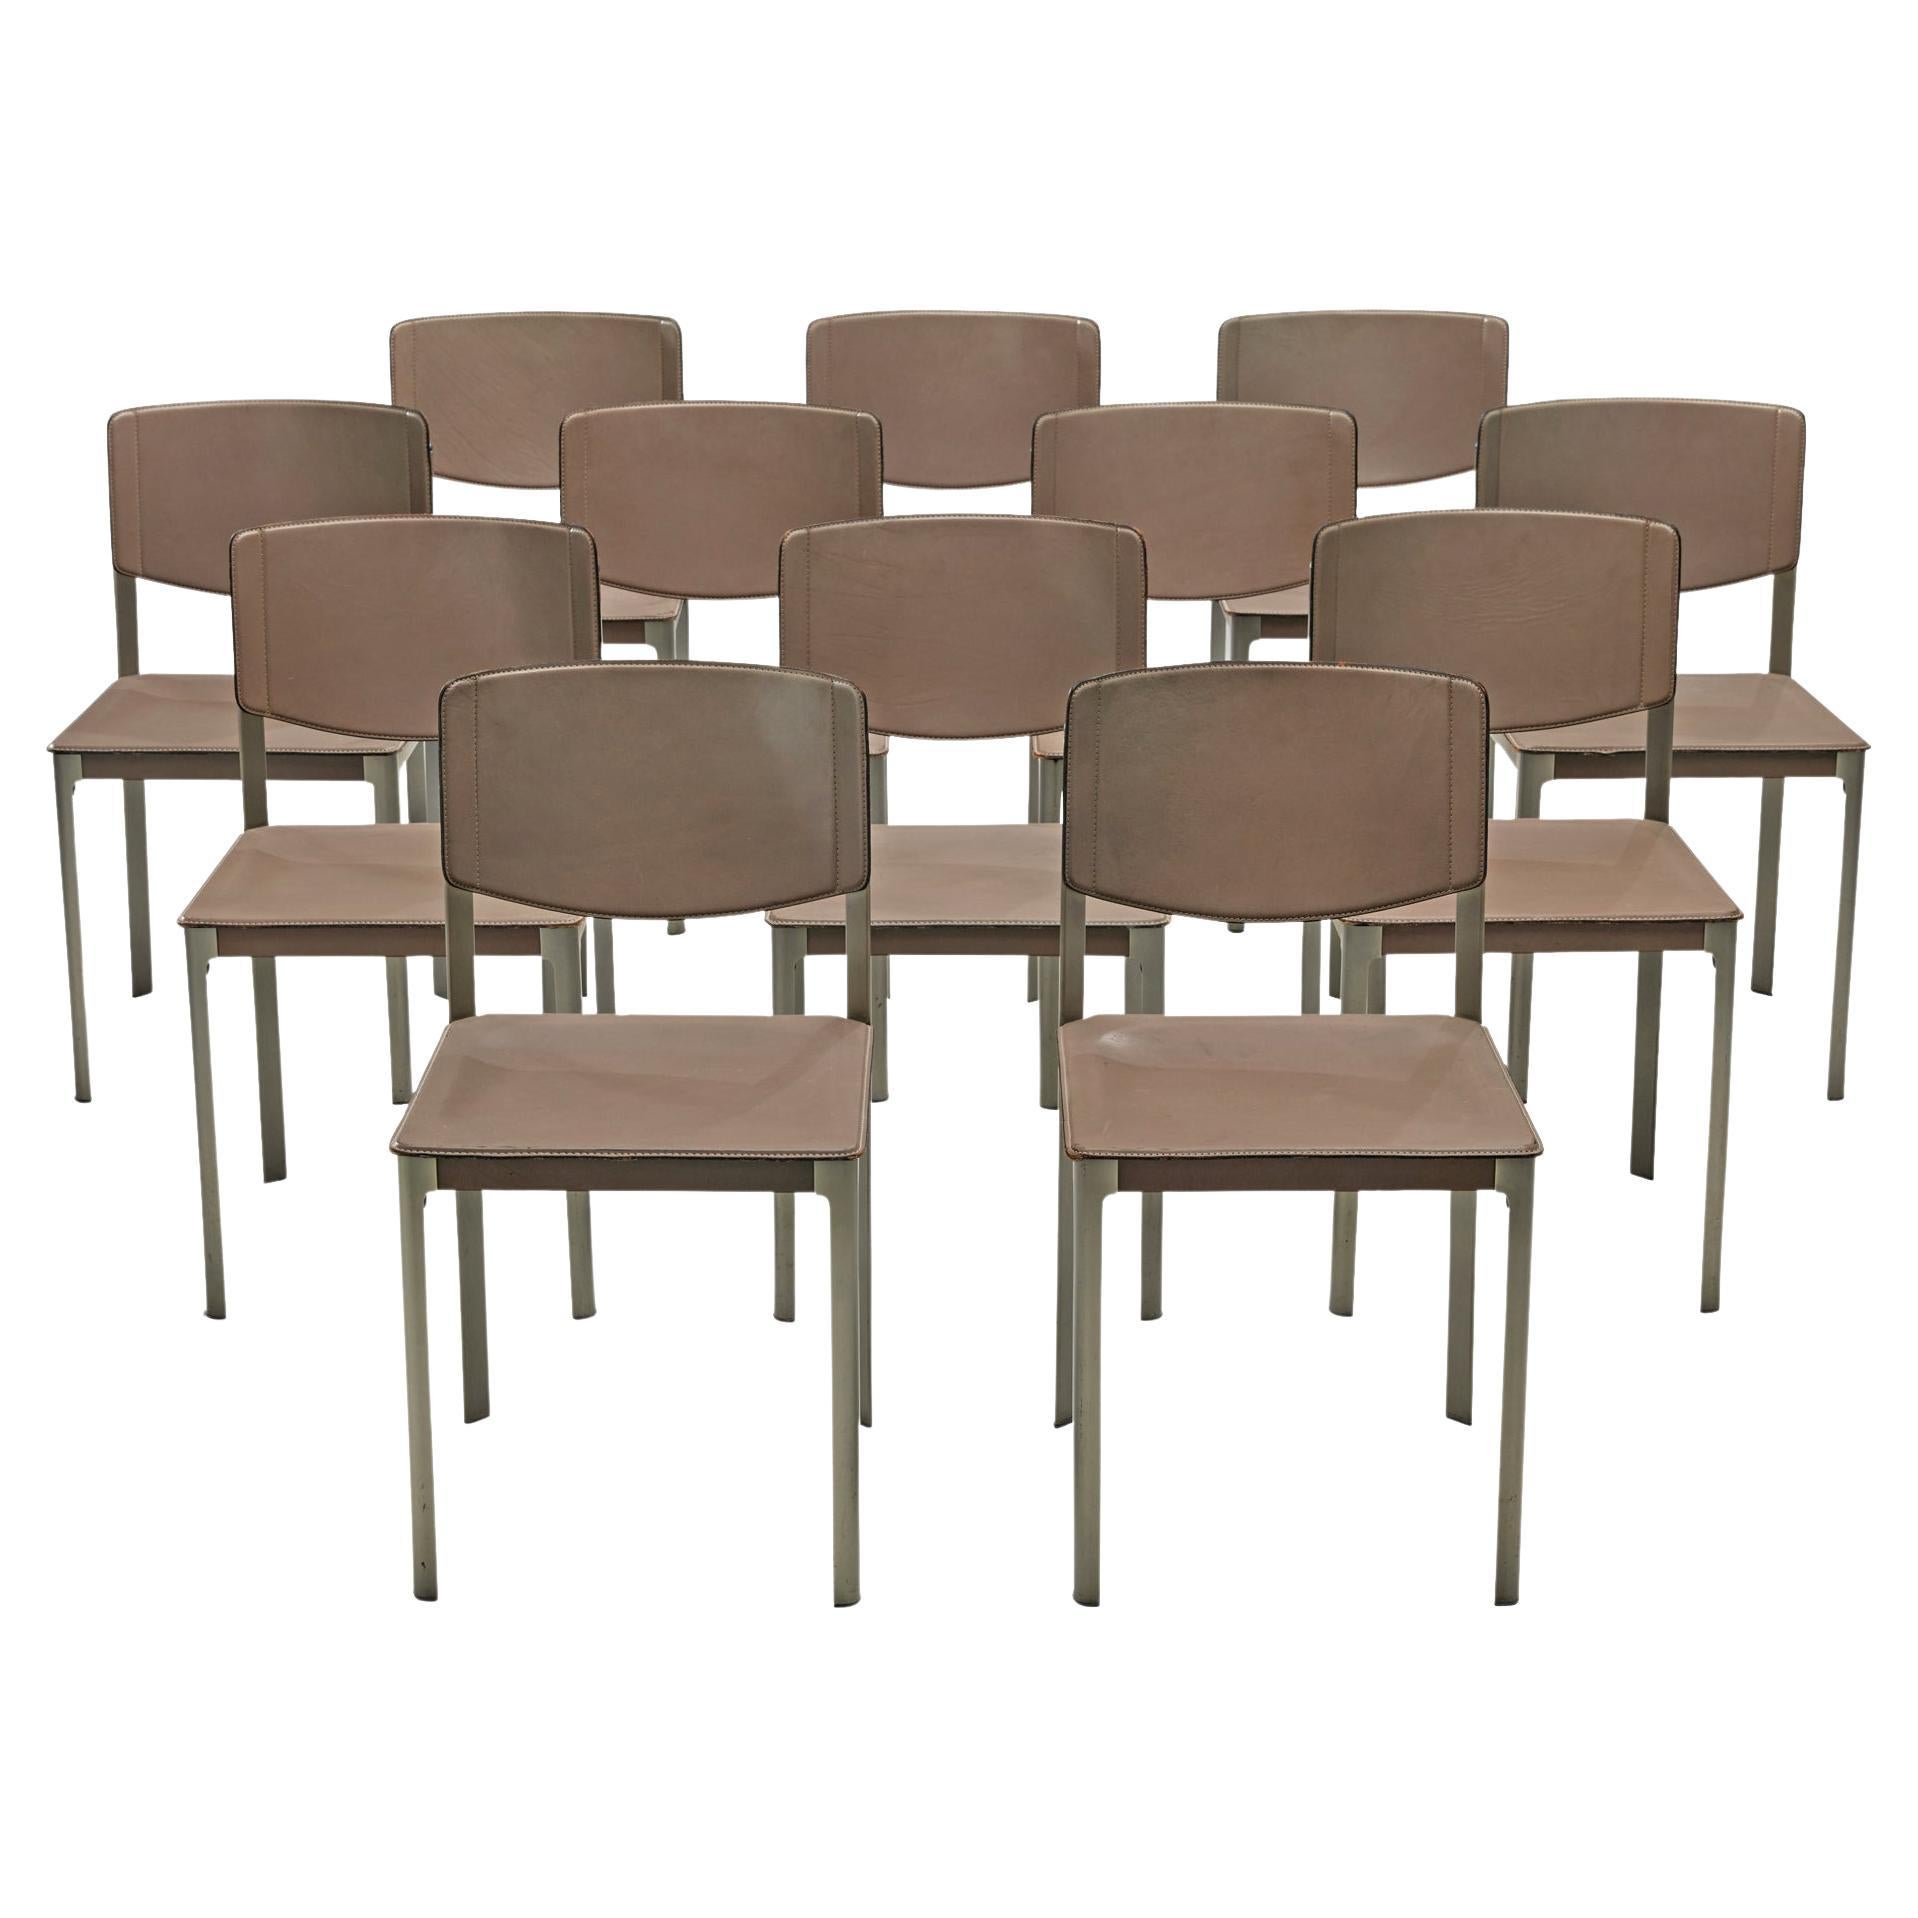 Matteo Grassi Set of Twelve Dining Chairs in Leather and Steel